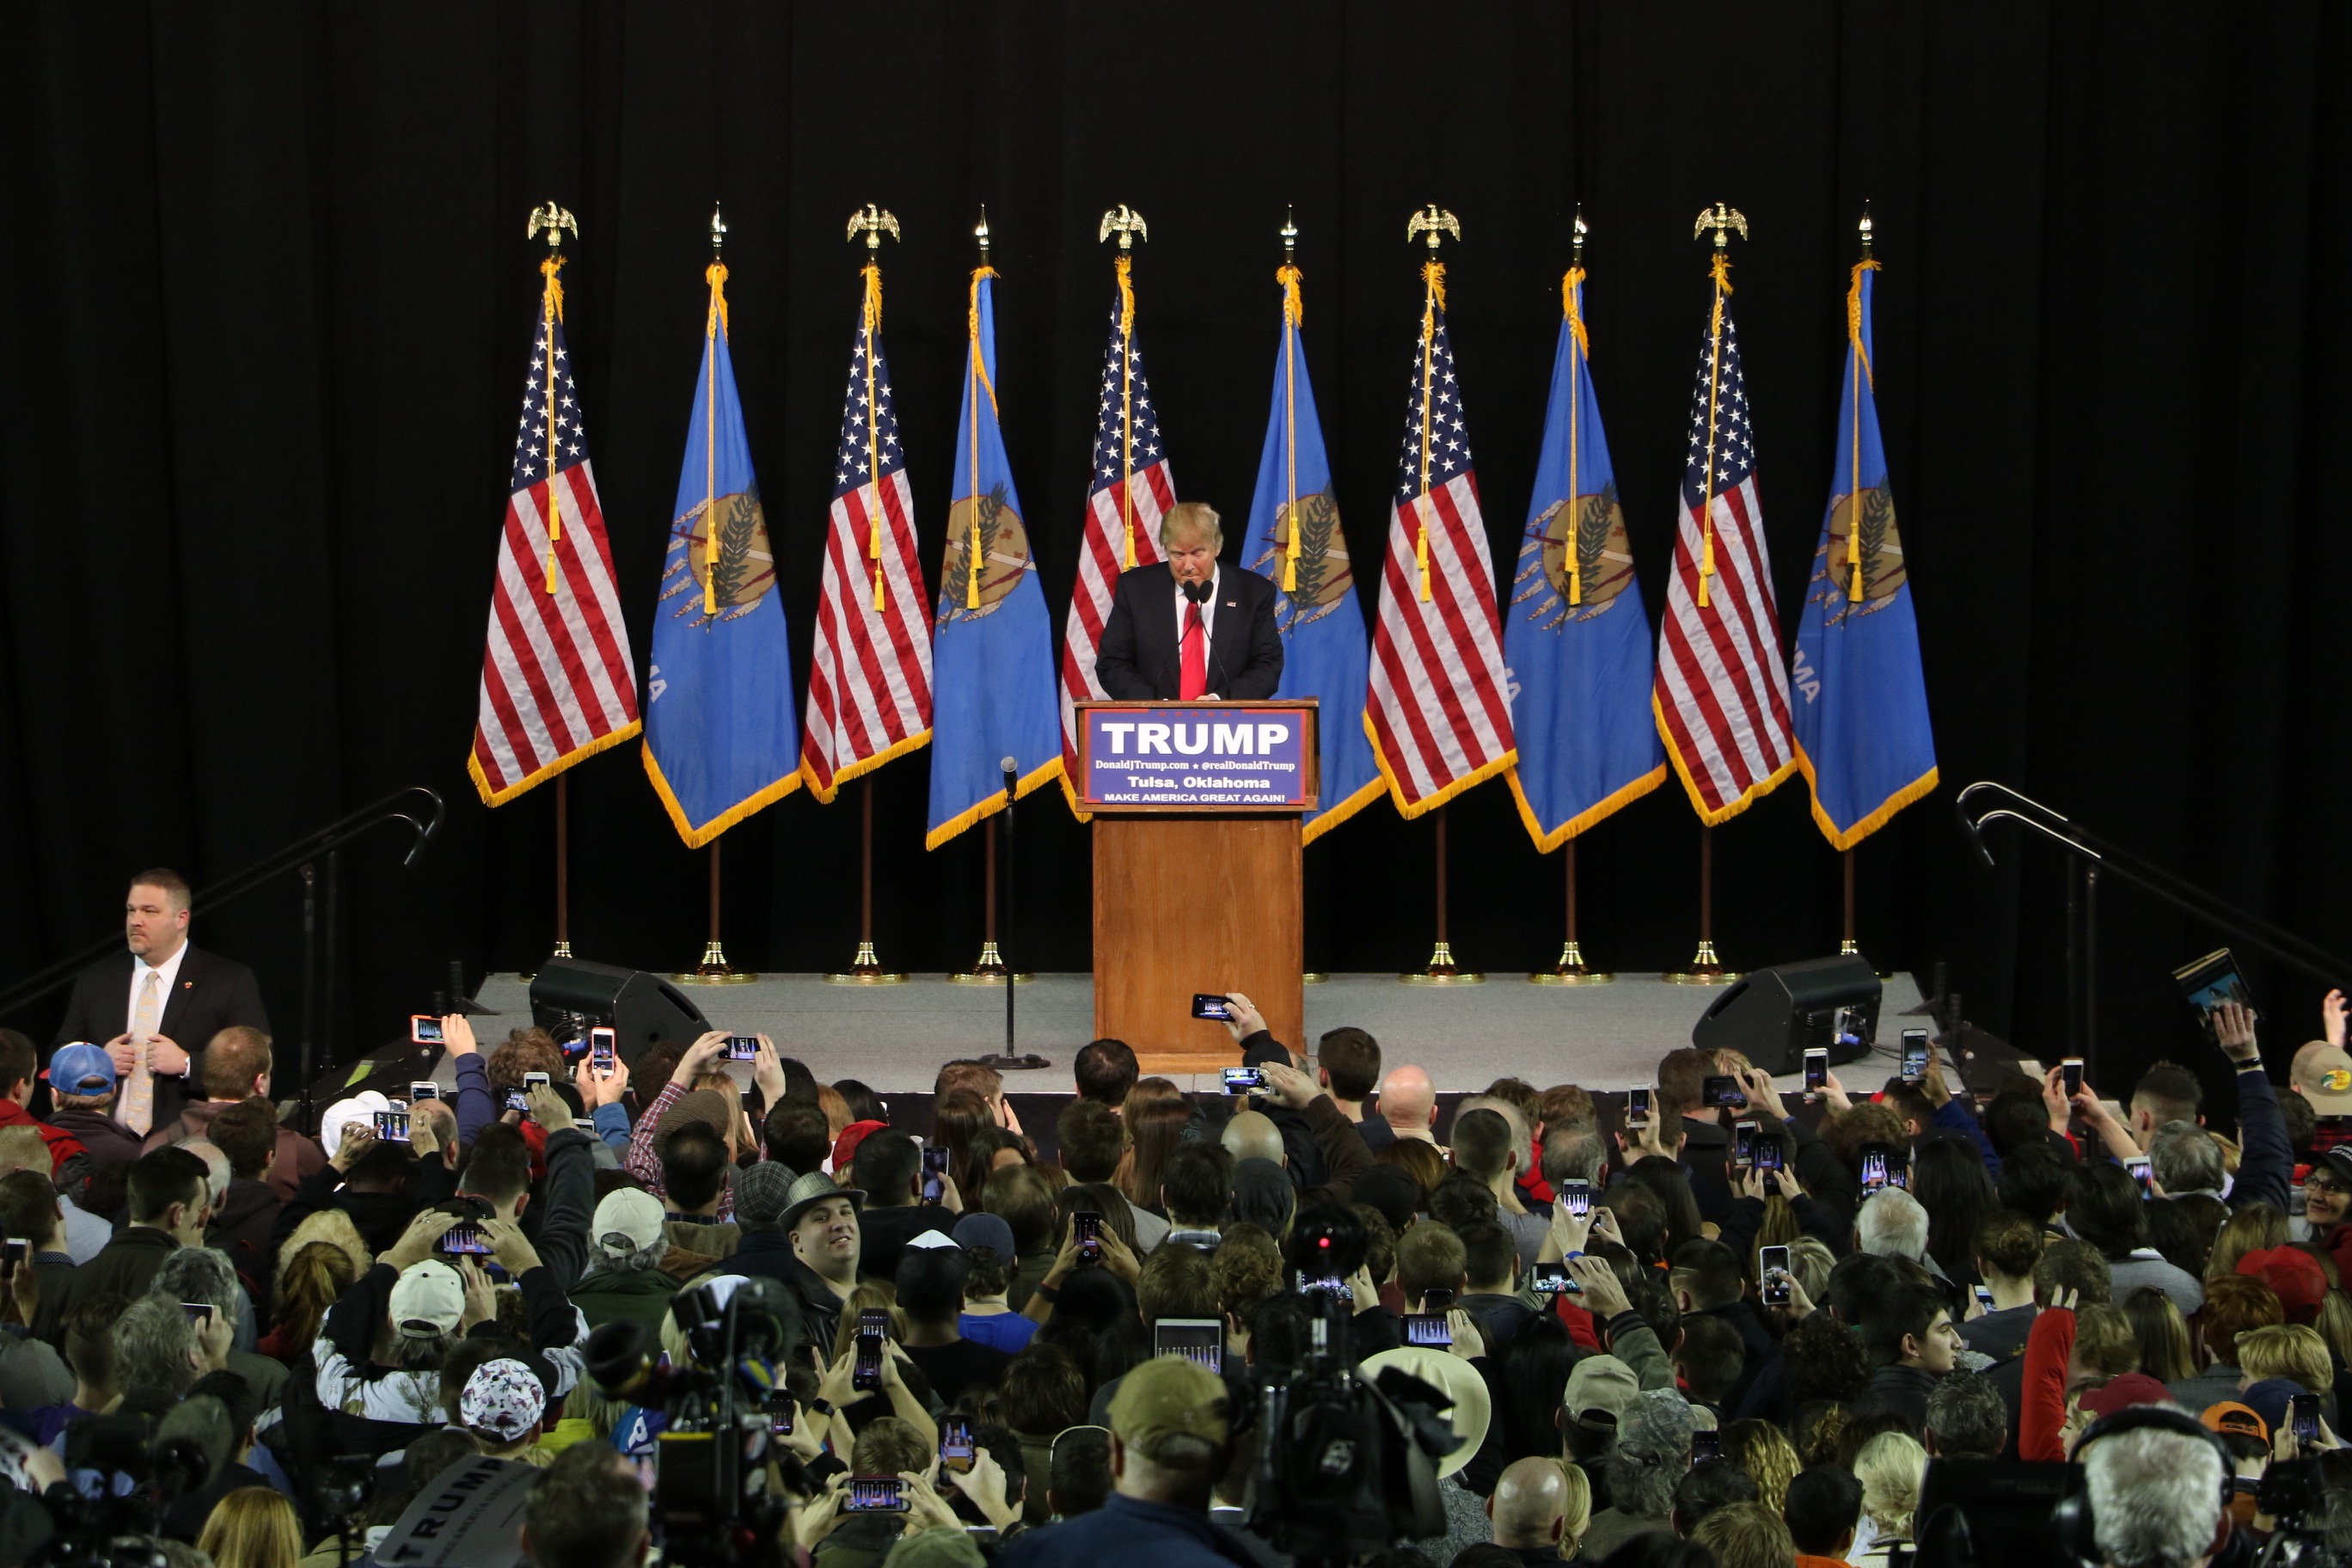 Donald Trump appears at a rally in Tulsa in January. Dylan Goforth/THE FRONTIER